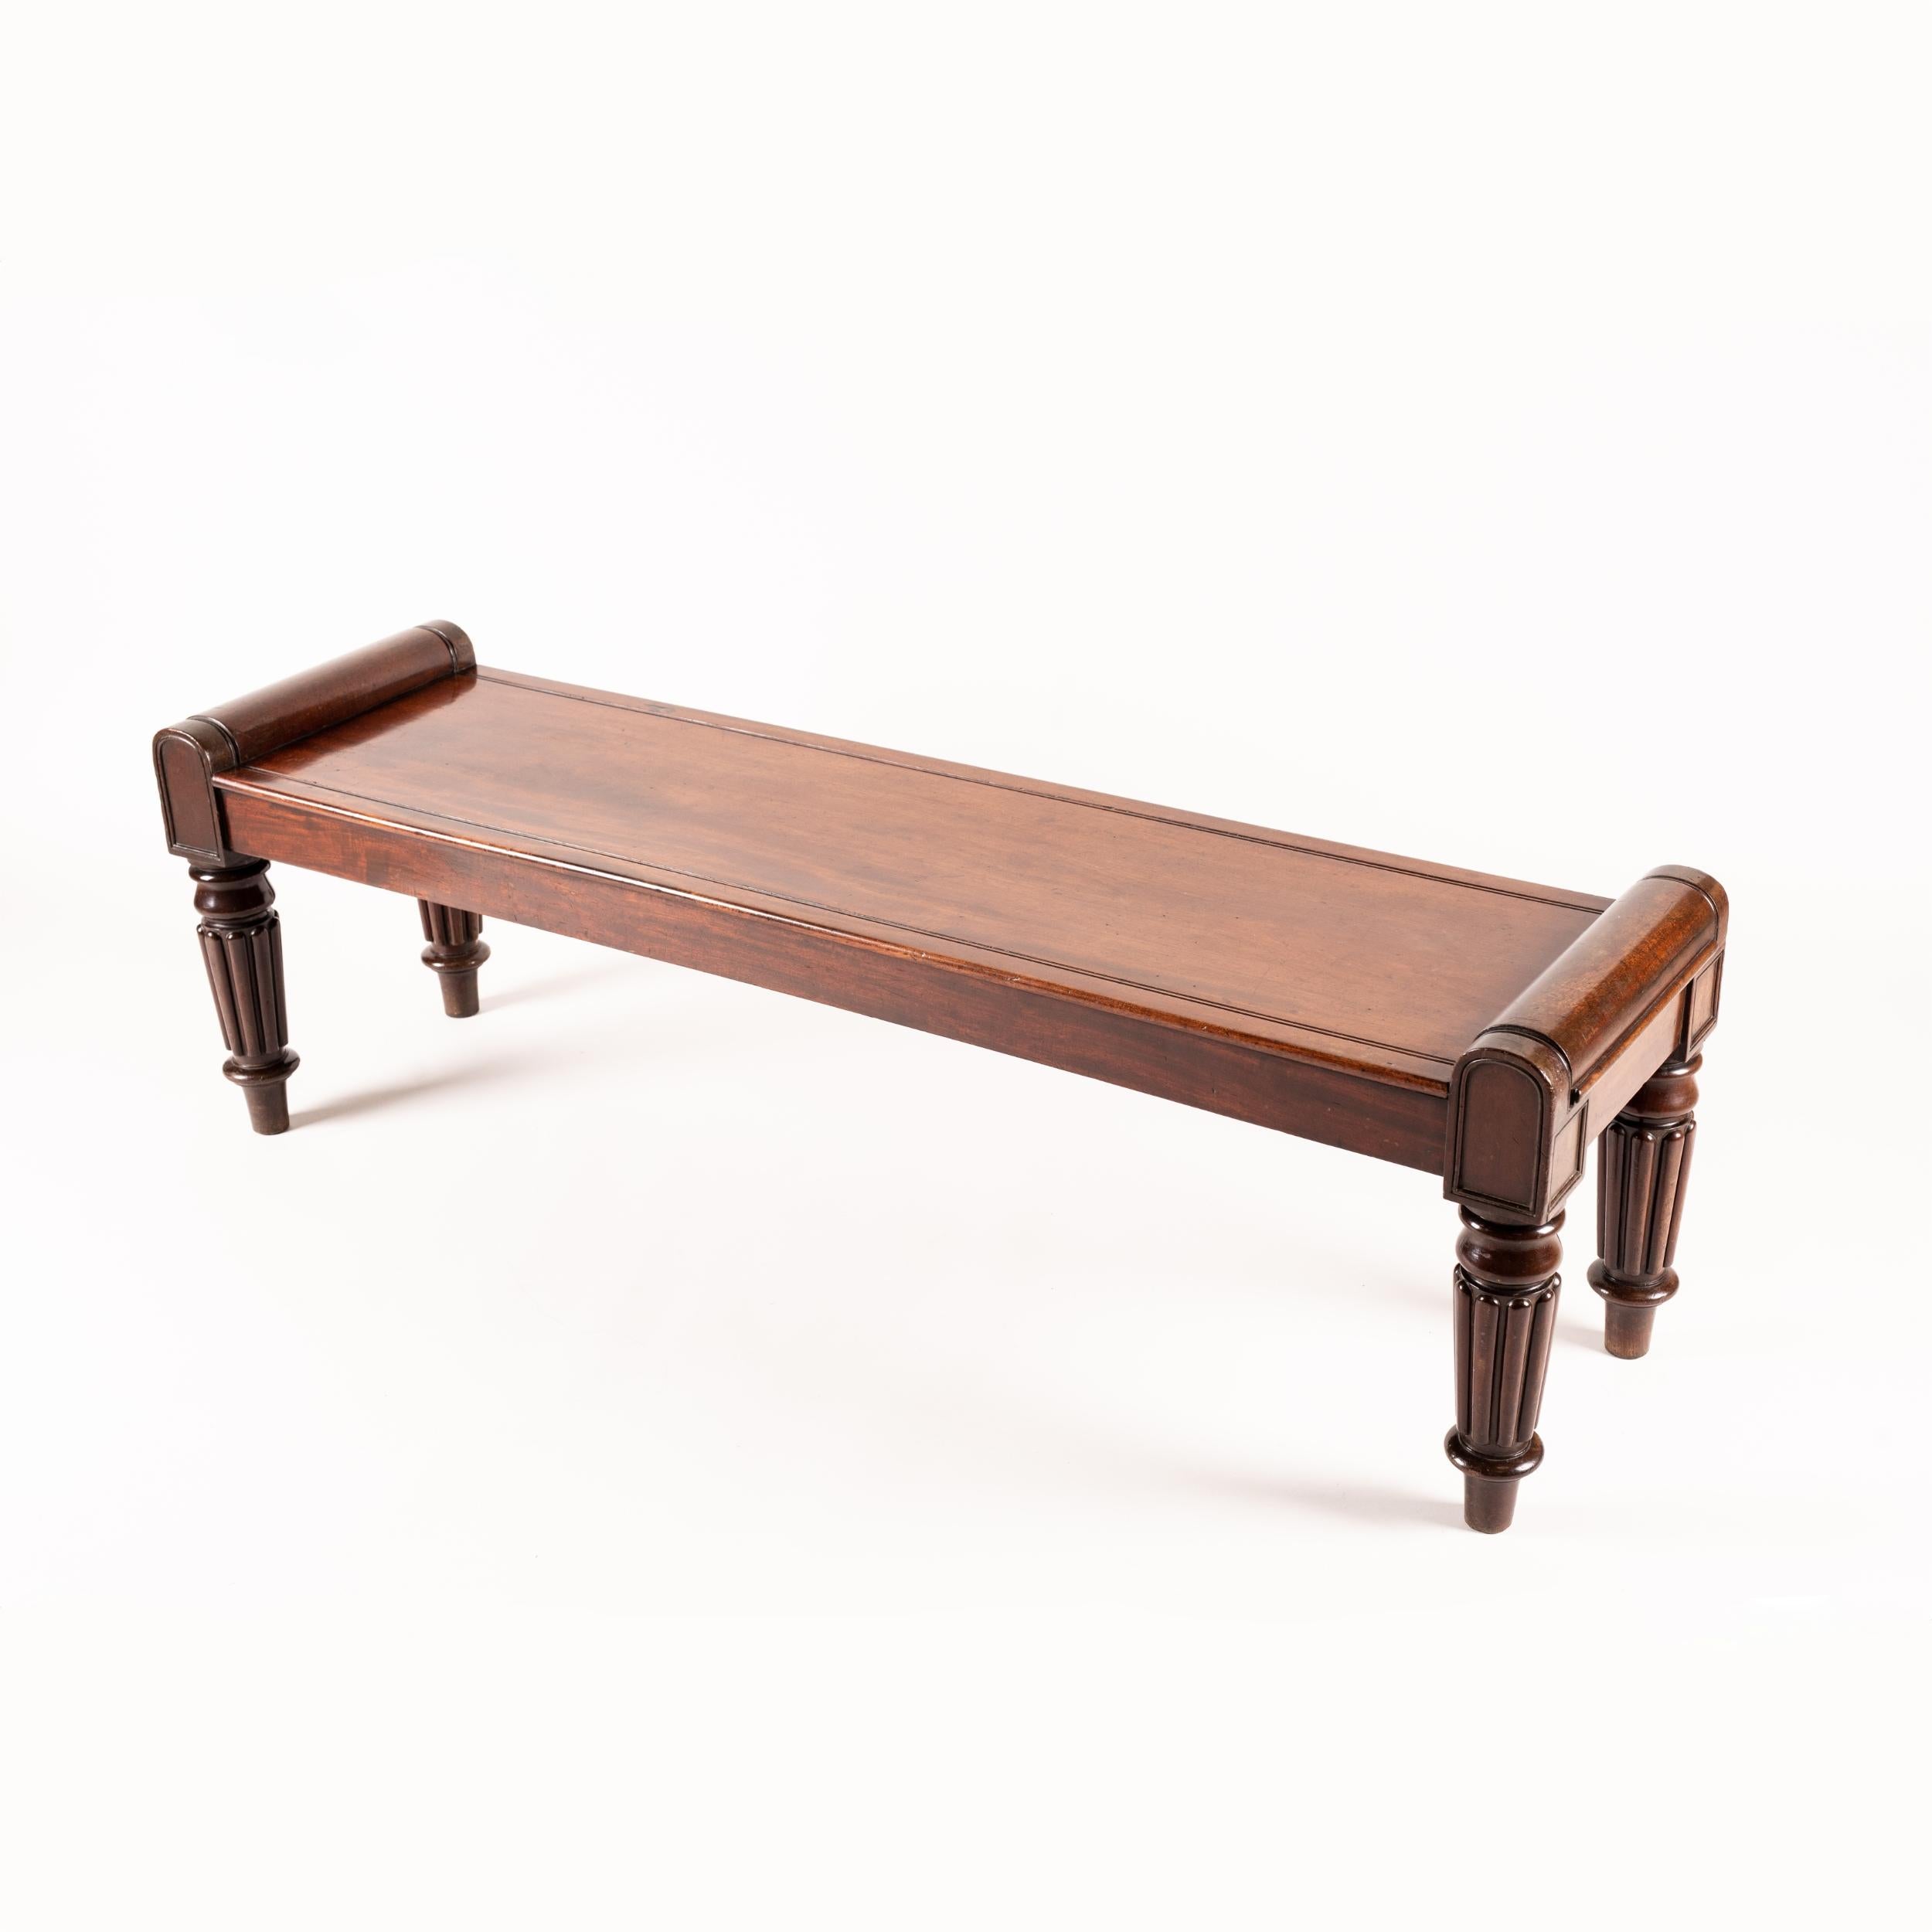 English Late Georgian Solid Mahogany Bench with Carved Legs